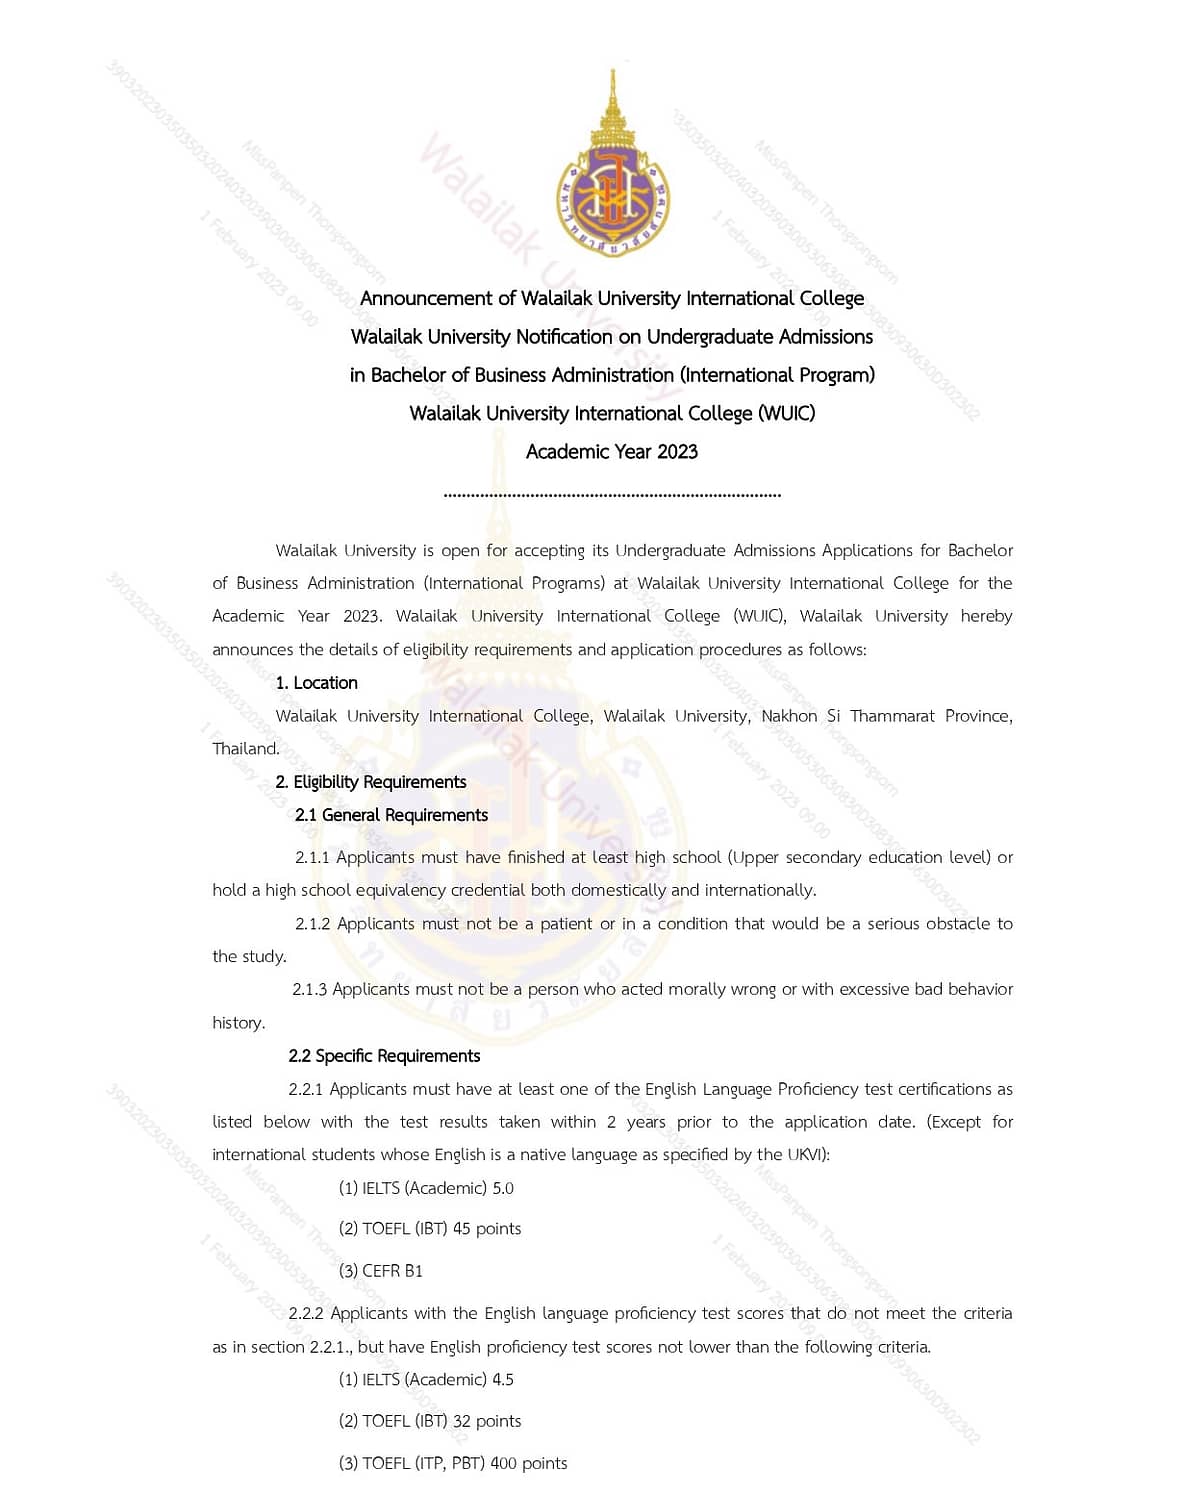 Announcement of Walailak University International College Walailak University Notification on Undergraduate Admissions in Bachelor of Business Administration (International Program) Walailak University International College (WUIC) Academic Year 2023